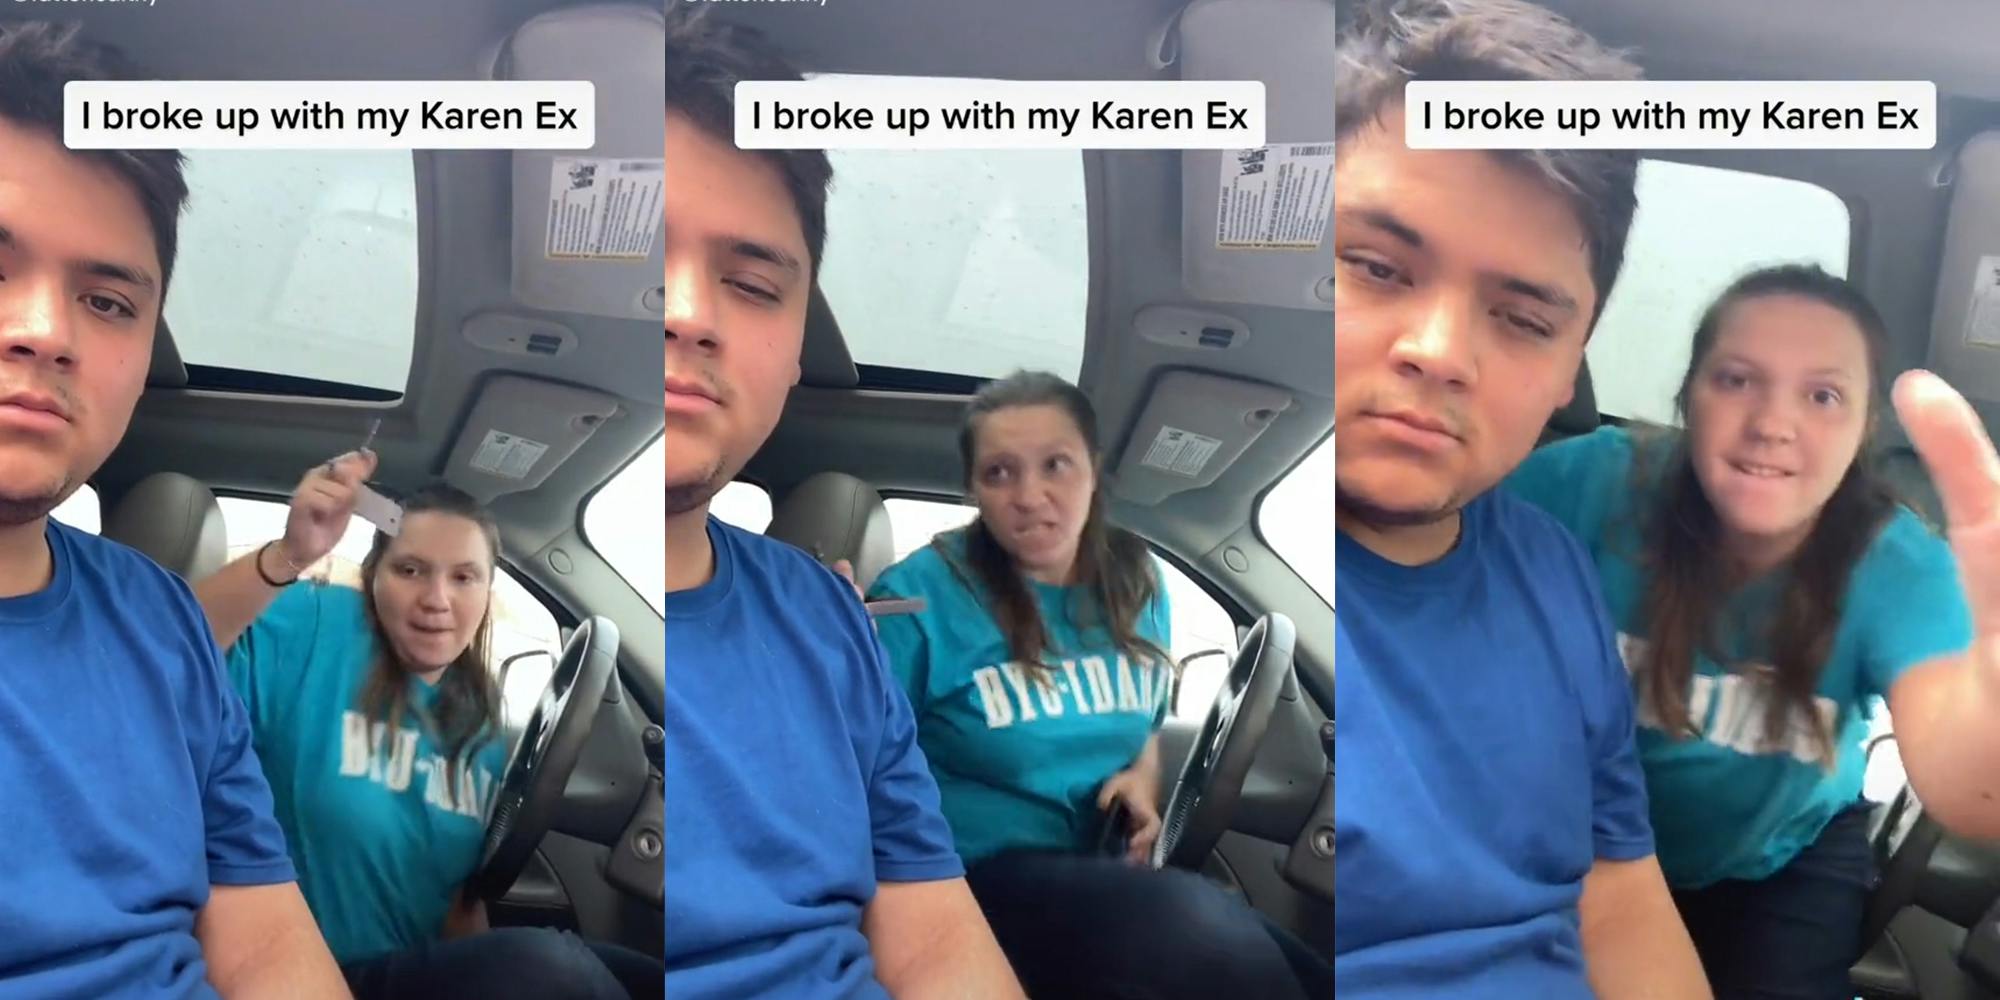 woman trying to attack man with car keys with caption "I broke up with my Karen Ex"